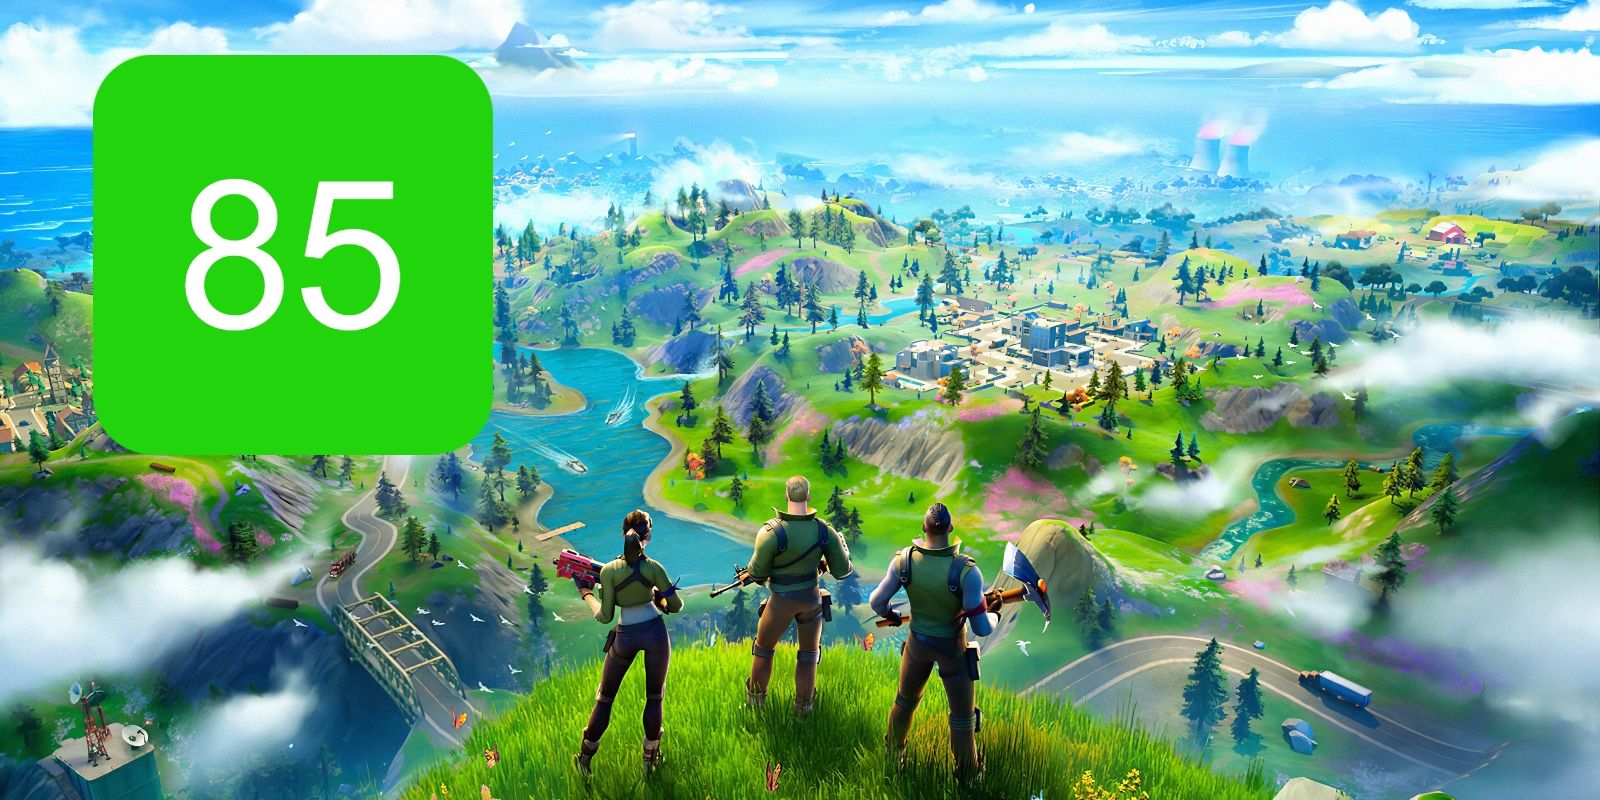 The XBox One Metascore for Fortnite featuring a poster from seasons 2